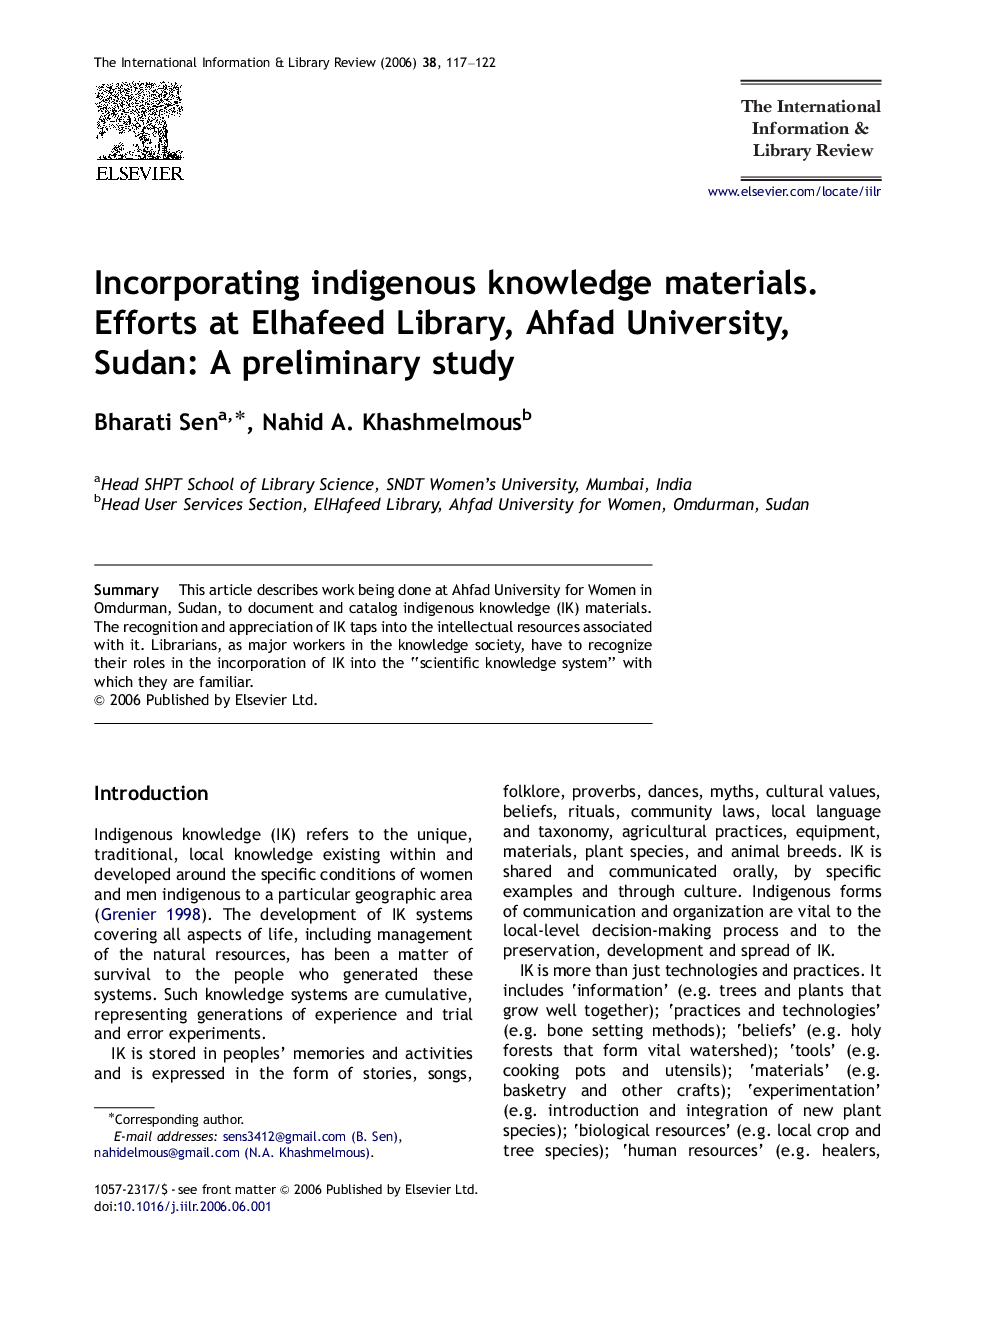 Incorporating indigenous knowledge materials. Efforts at Elhafeed Library, Ahfad University, Sudan: A preliminary study